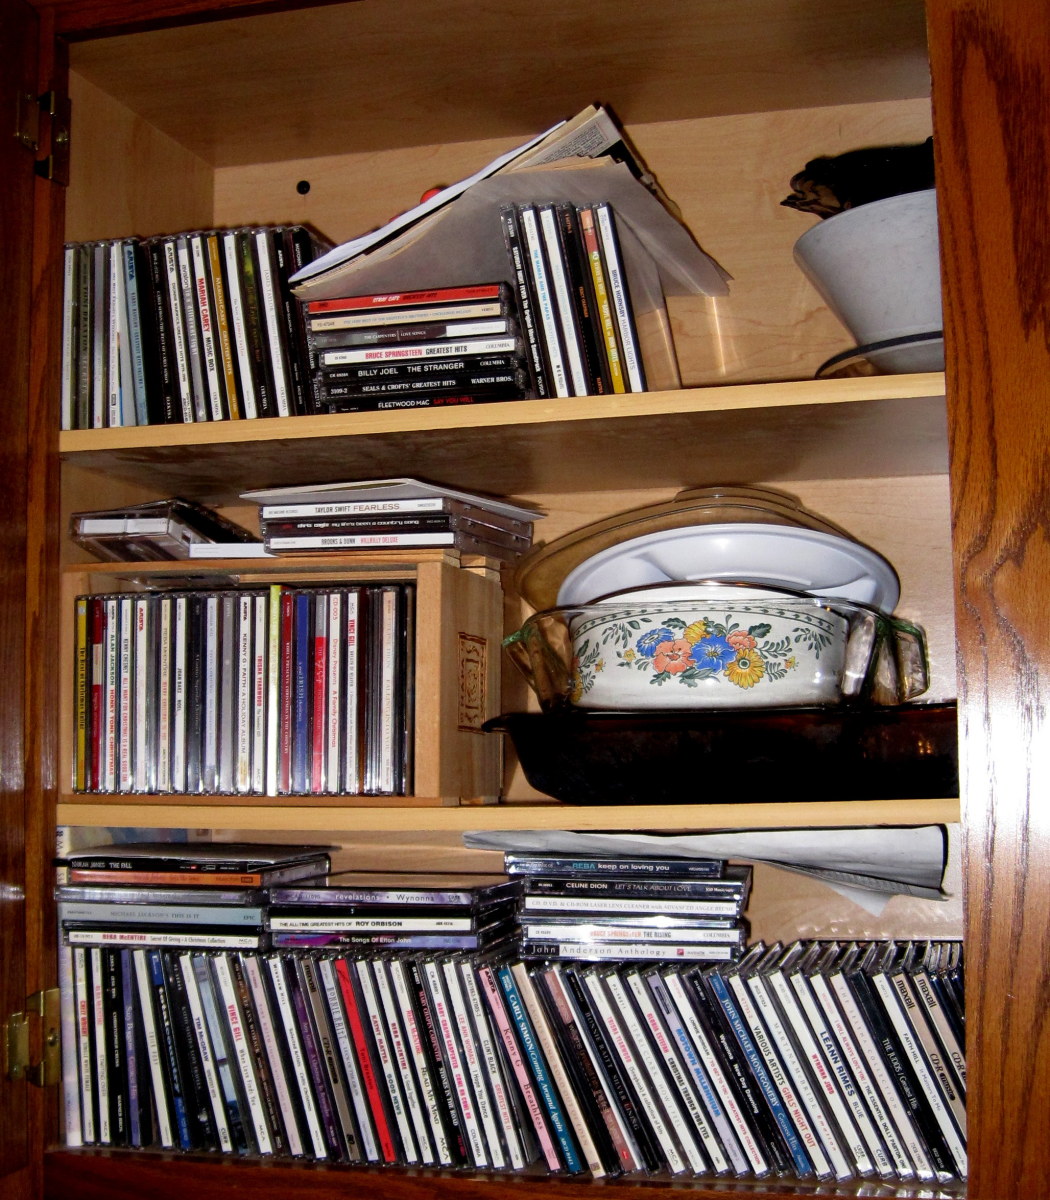 Part of my CD collection